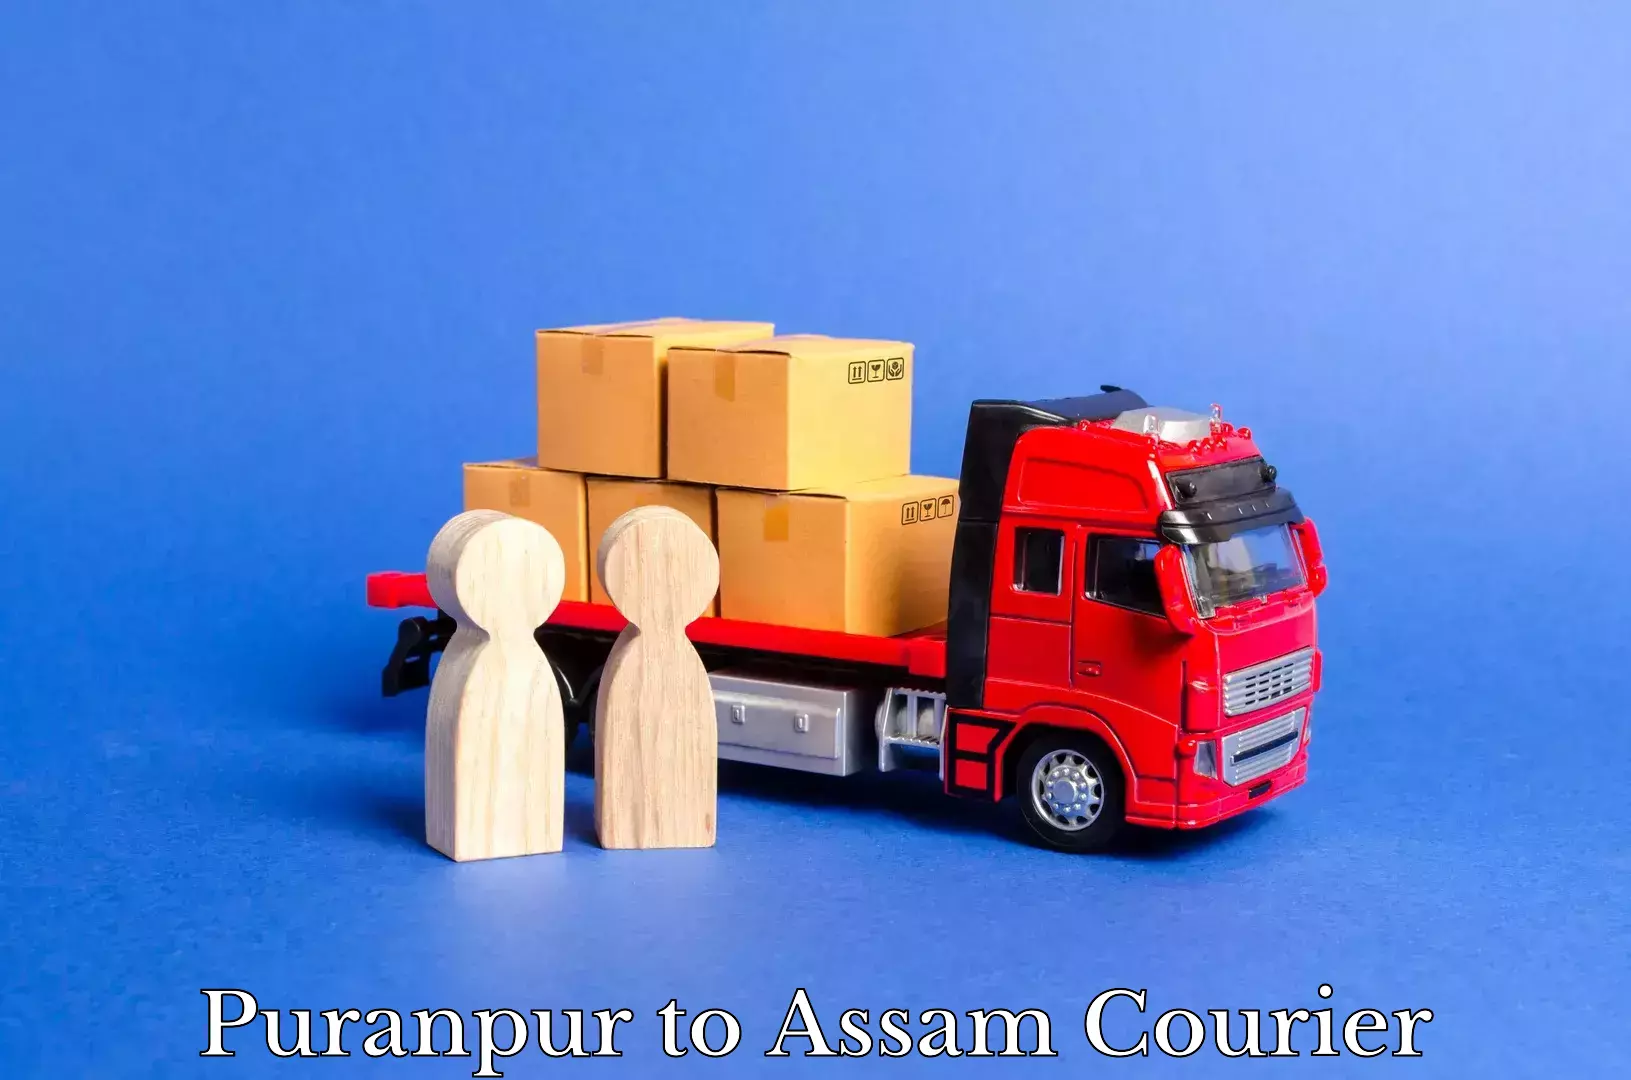 Express delivery network Puranpur to Assam